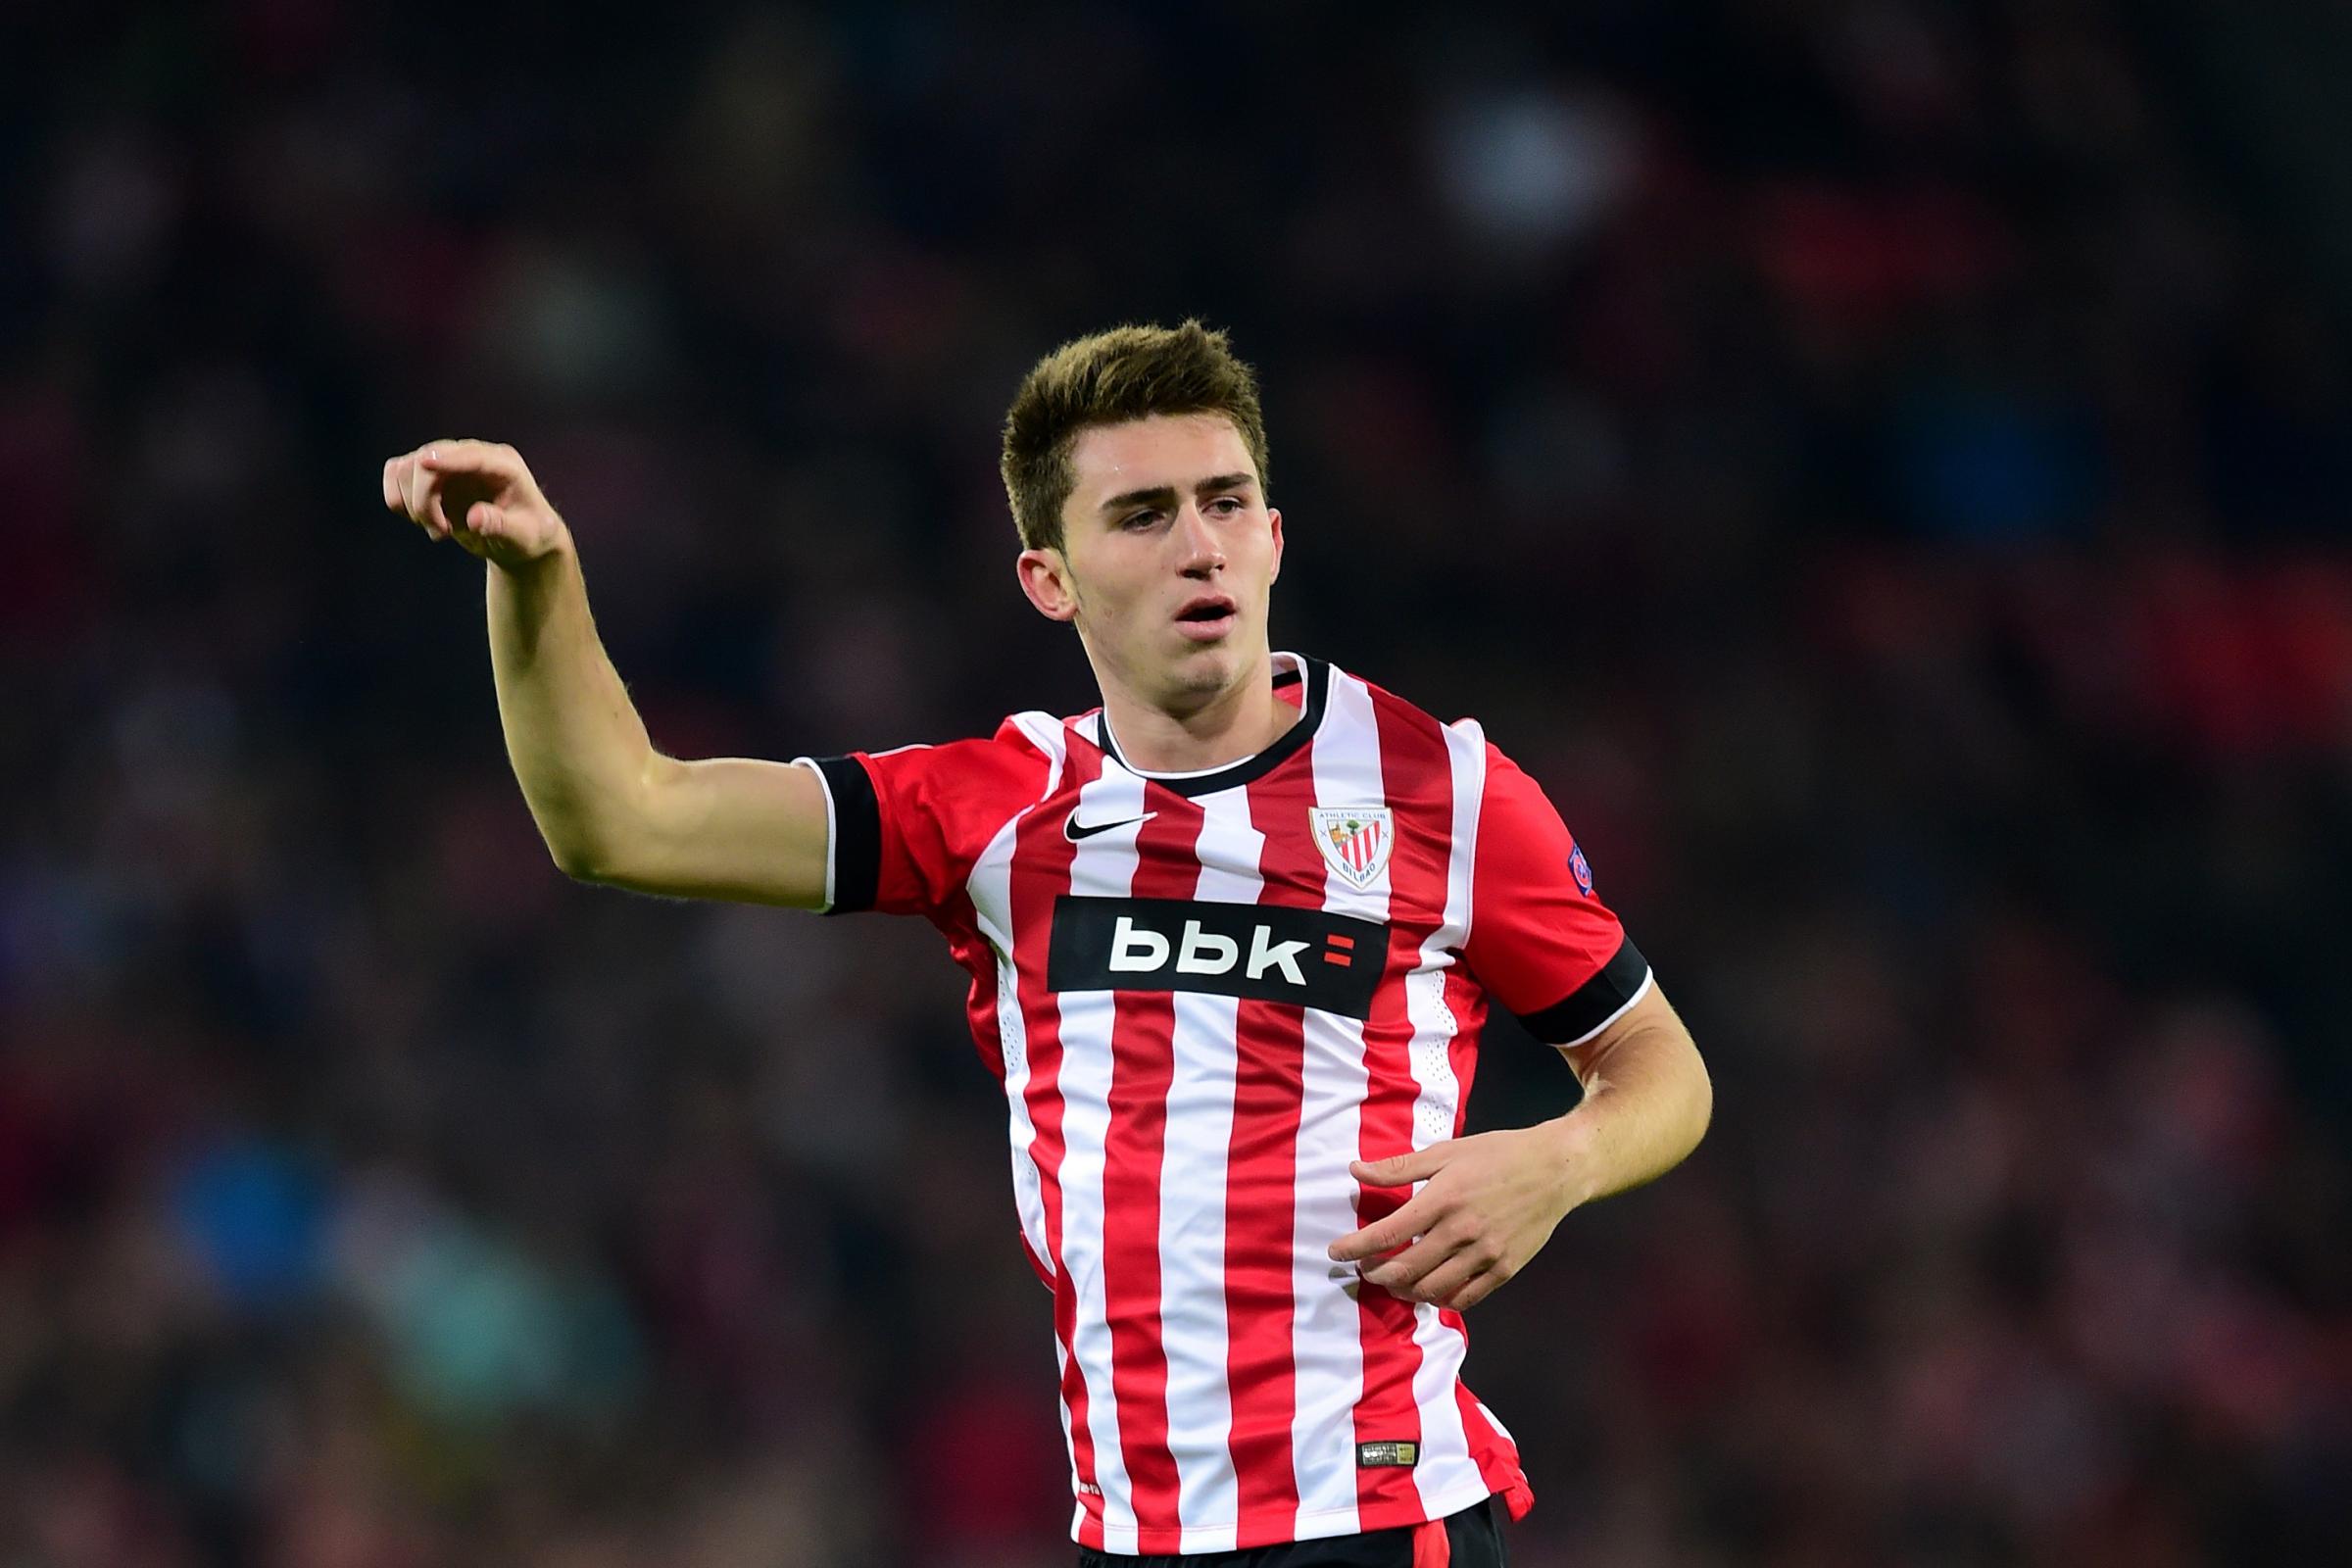 Aymeric Laporte looks set to join Manchester City as Pep Guardiola targets title